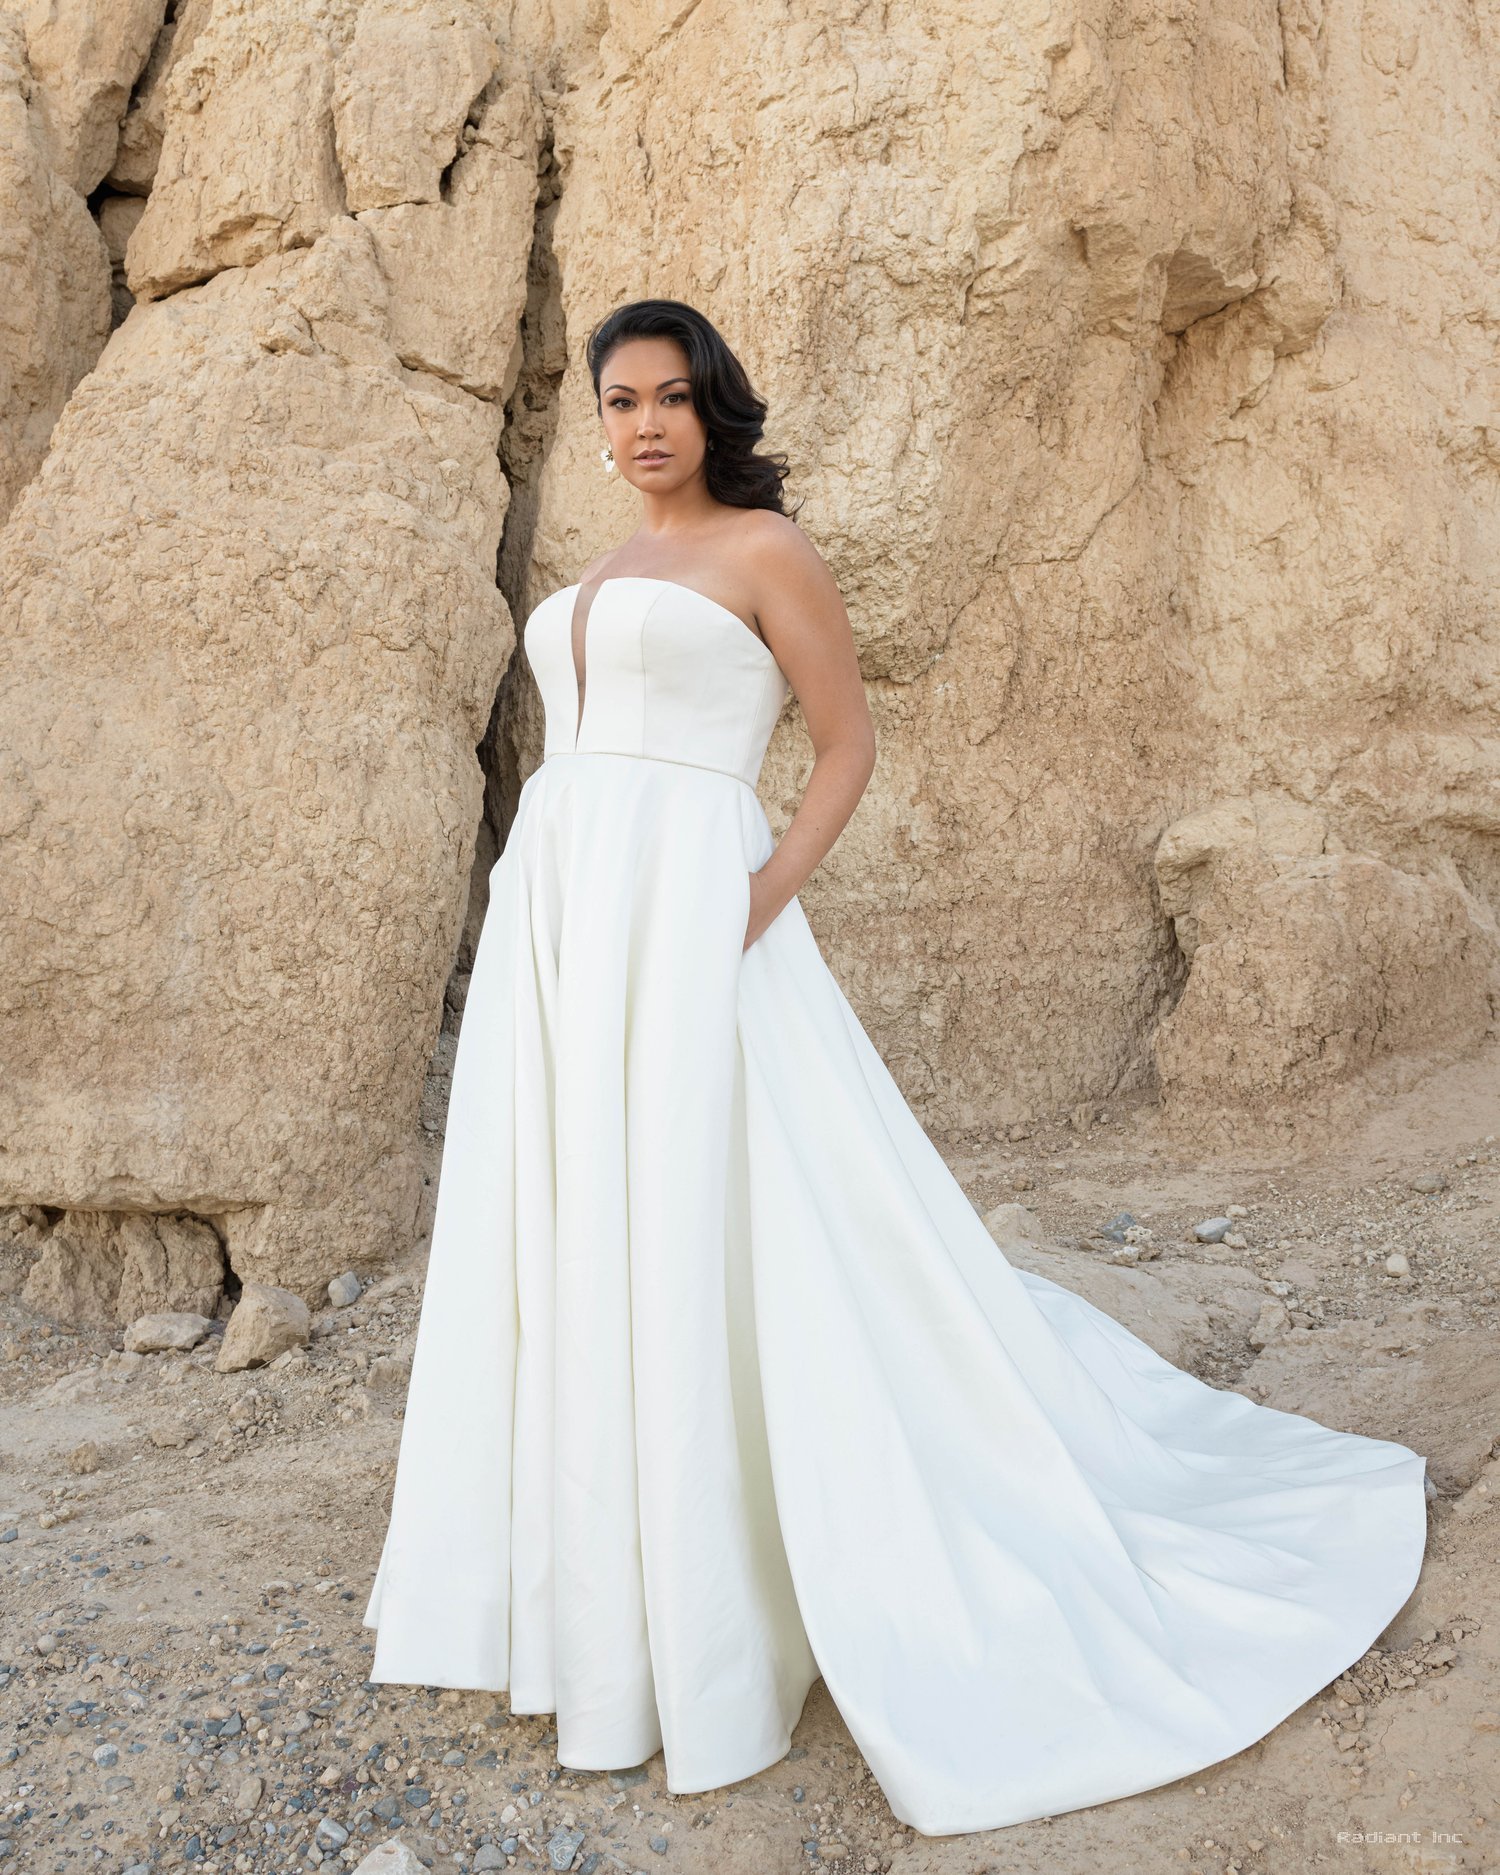 Dany-Tabet-Girl-Plus-Size-Curvy-Bridal-Collection-Wedding-Dresses-Brides-by-Young-Indiana-Illinois-New-Jersey-Lennox.jpeg